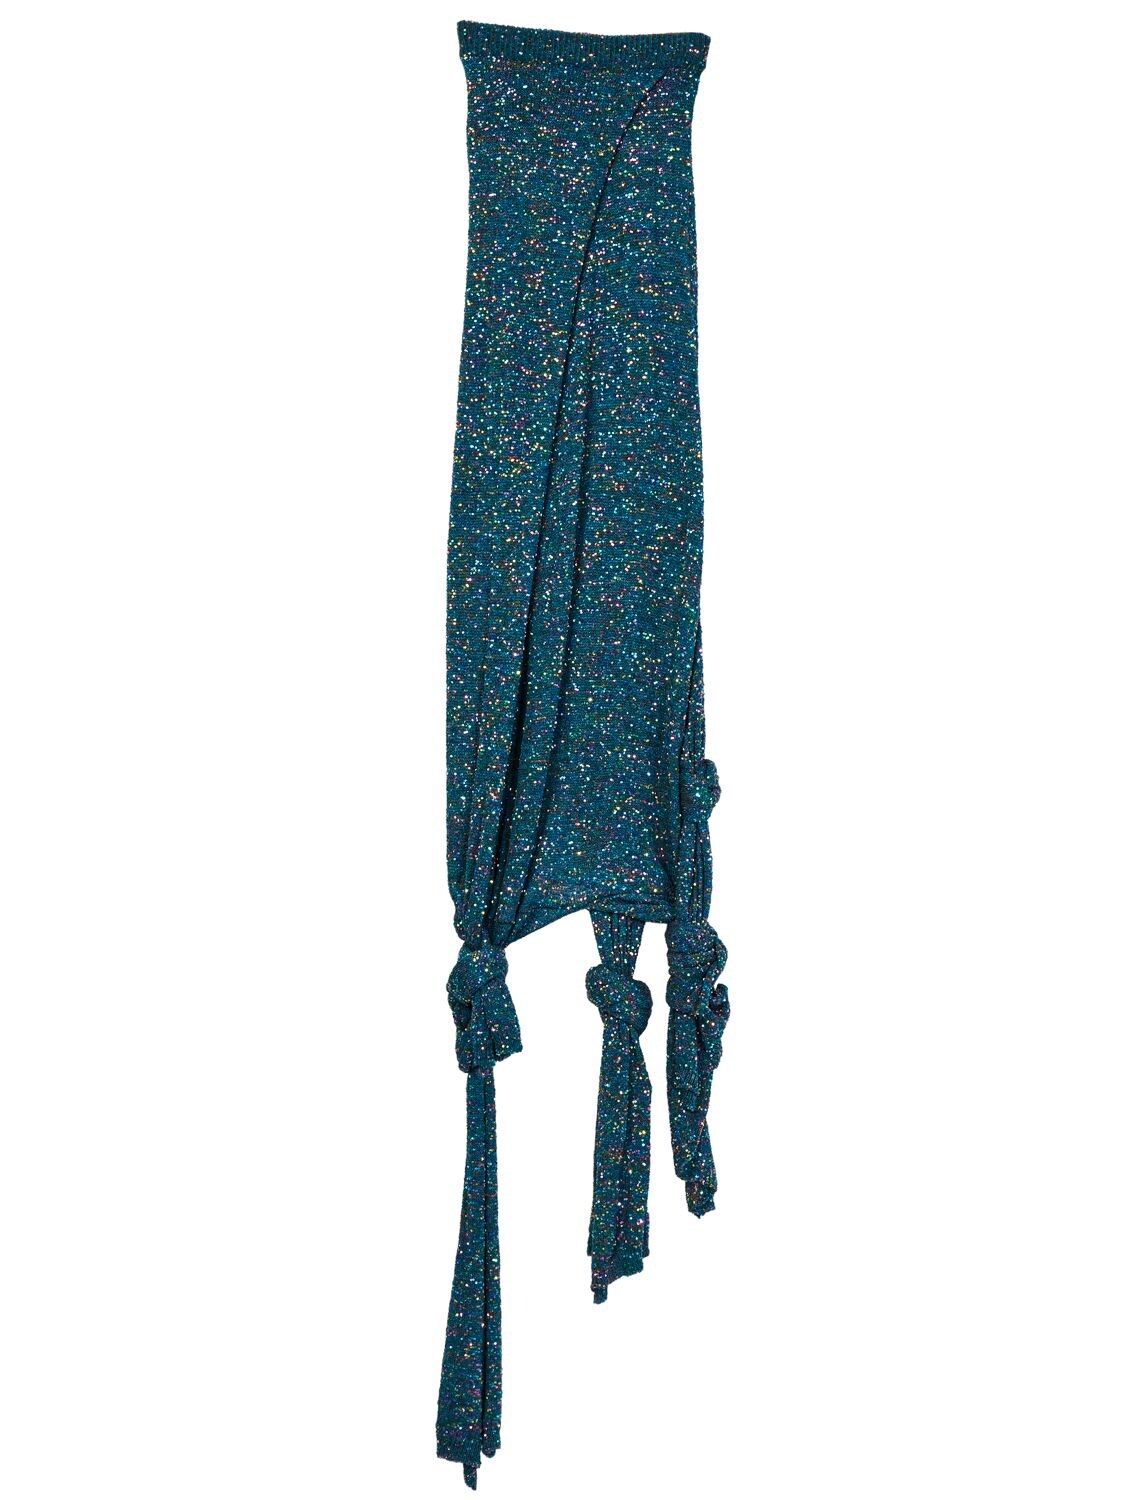 Loewe Sequined Knit Jersey Long Skirt W/ Knot In Green,multi | ModeSens